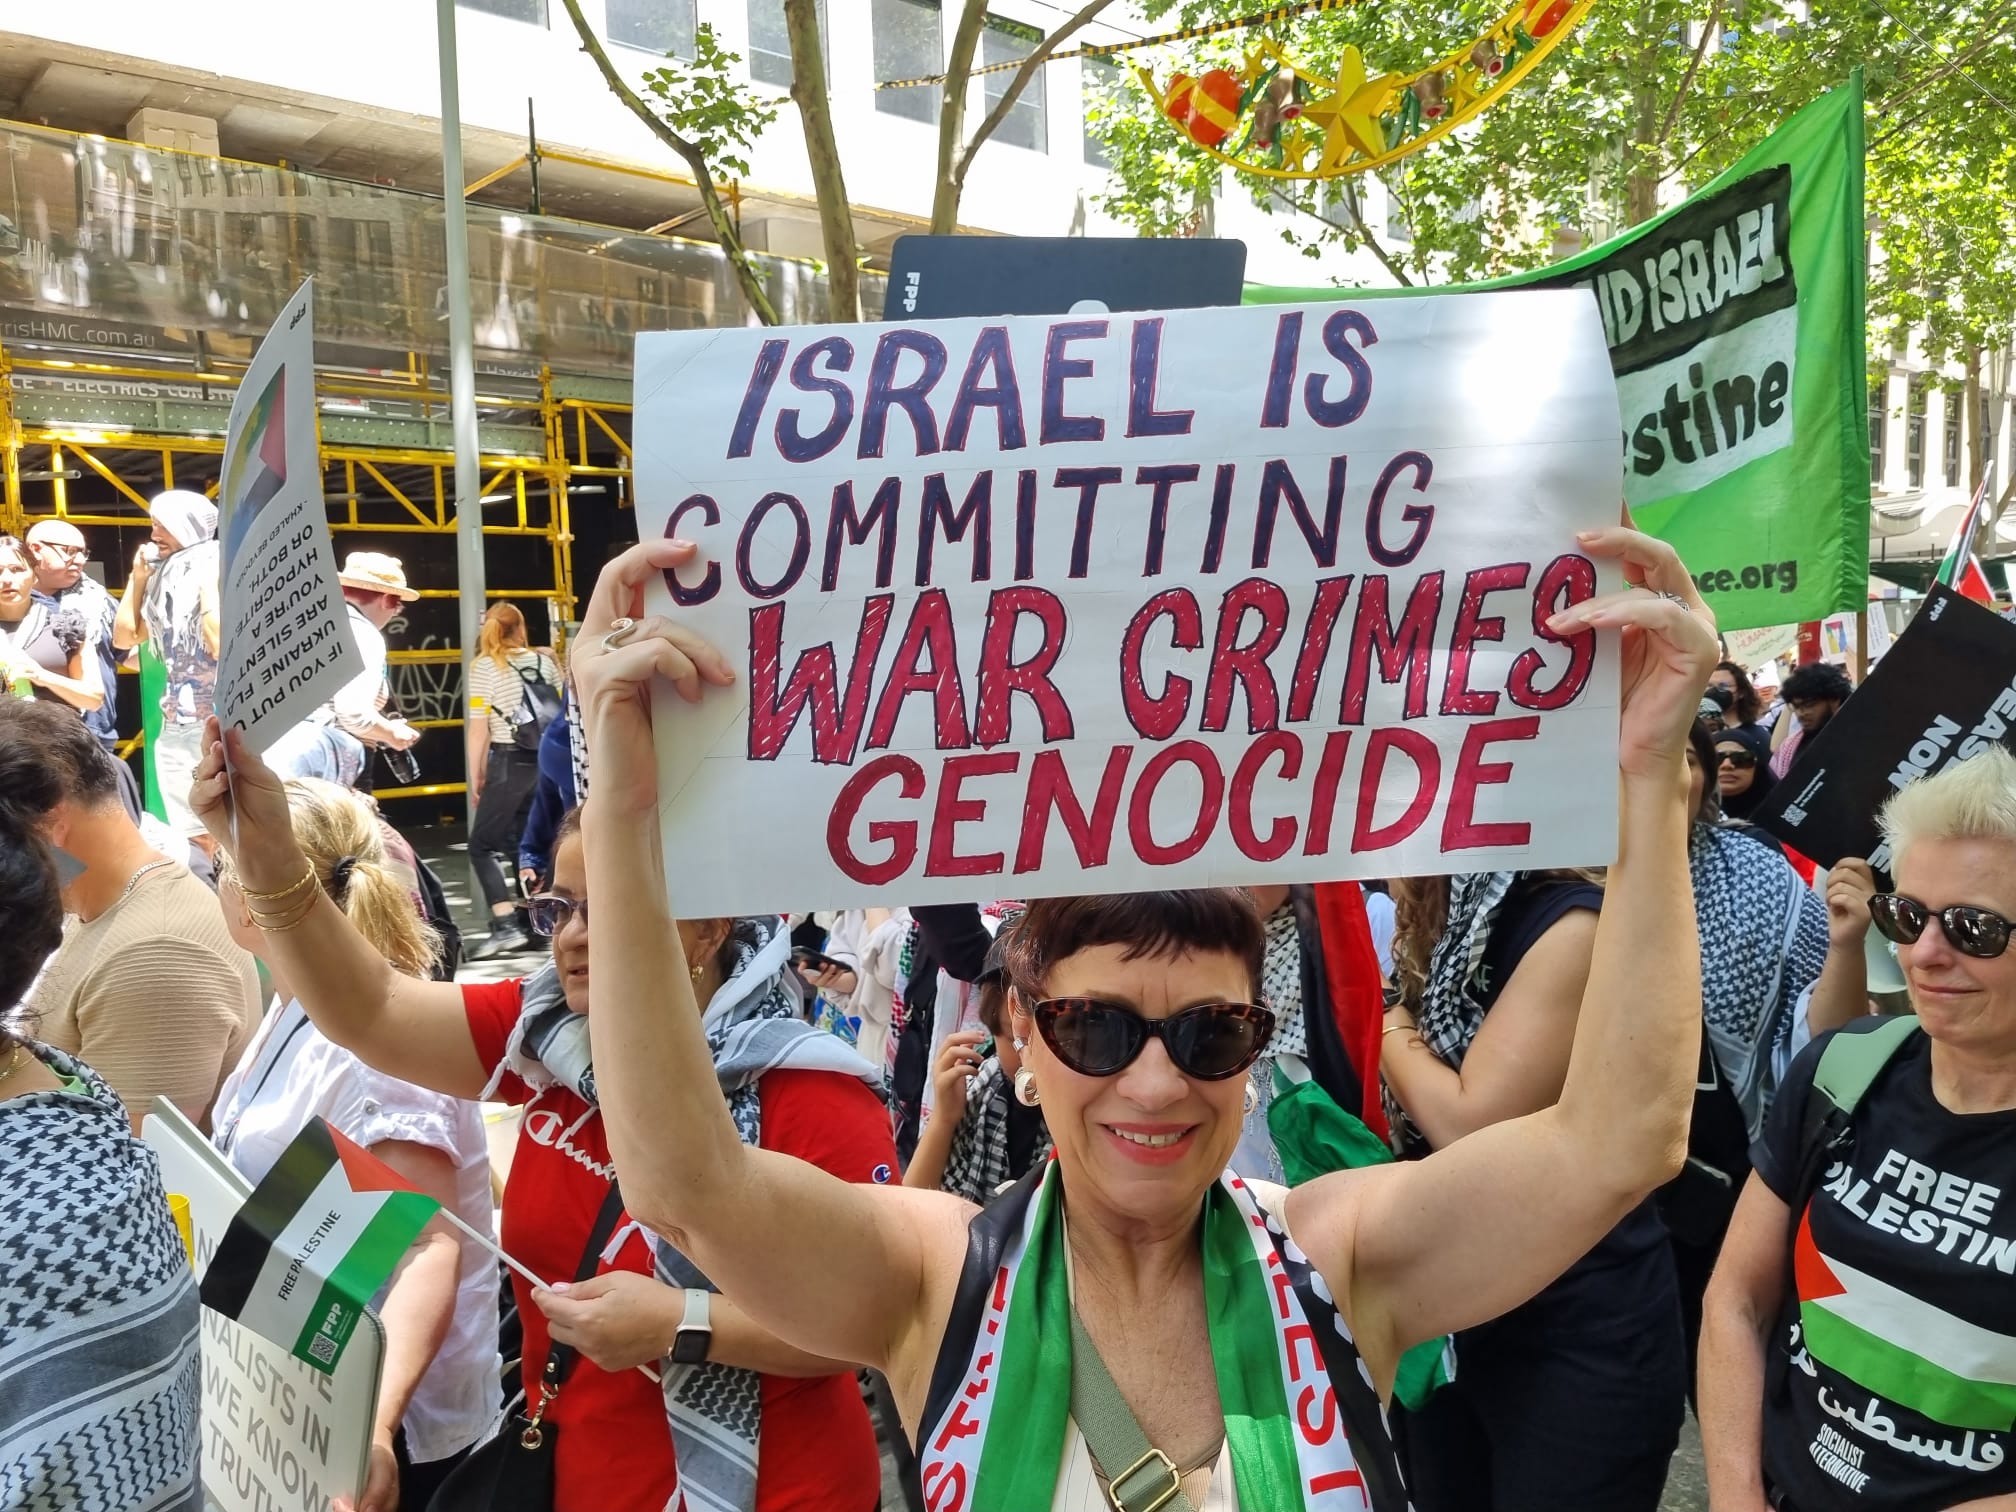 Israel is committing war crimes, Naarm/Melbourne